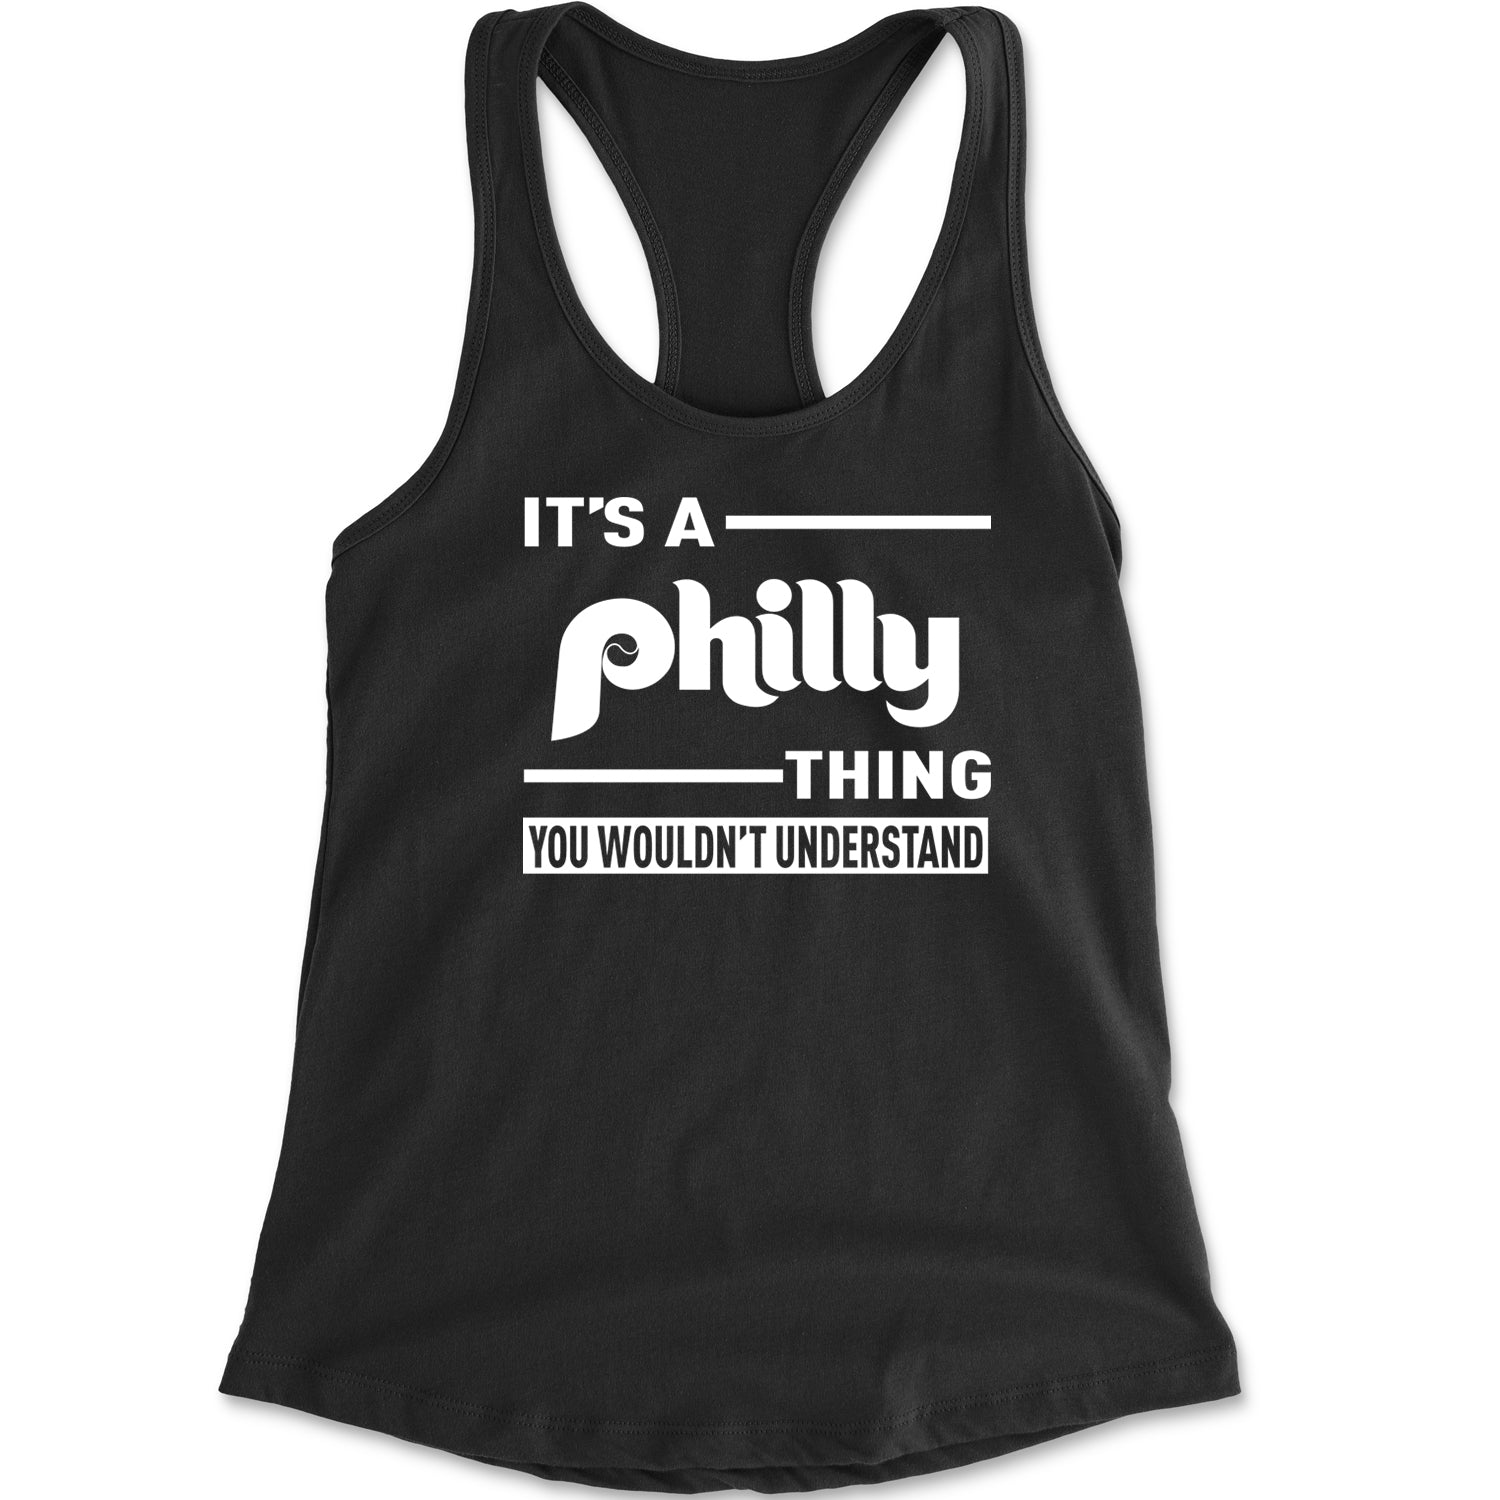 It's A Philly Thing, You Wouldn't Understand Racerback Tank Top for Women baseball, filly, football, jawn, morgan, Philadelphia, philli by Expression Tees